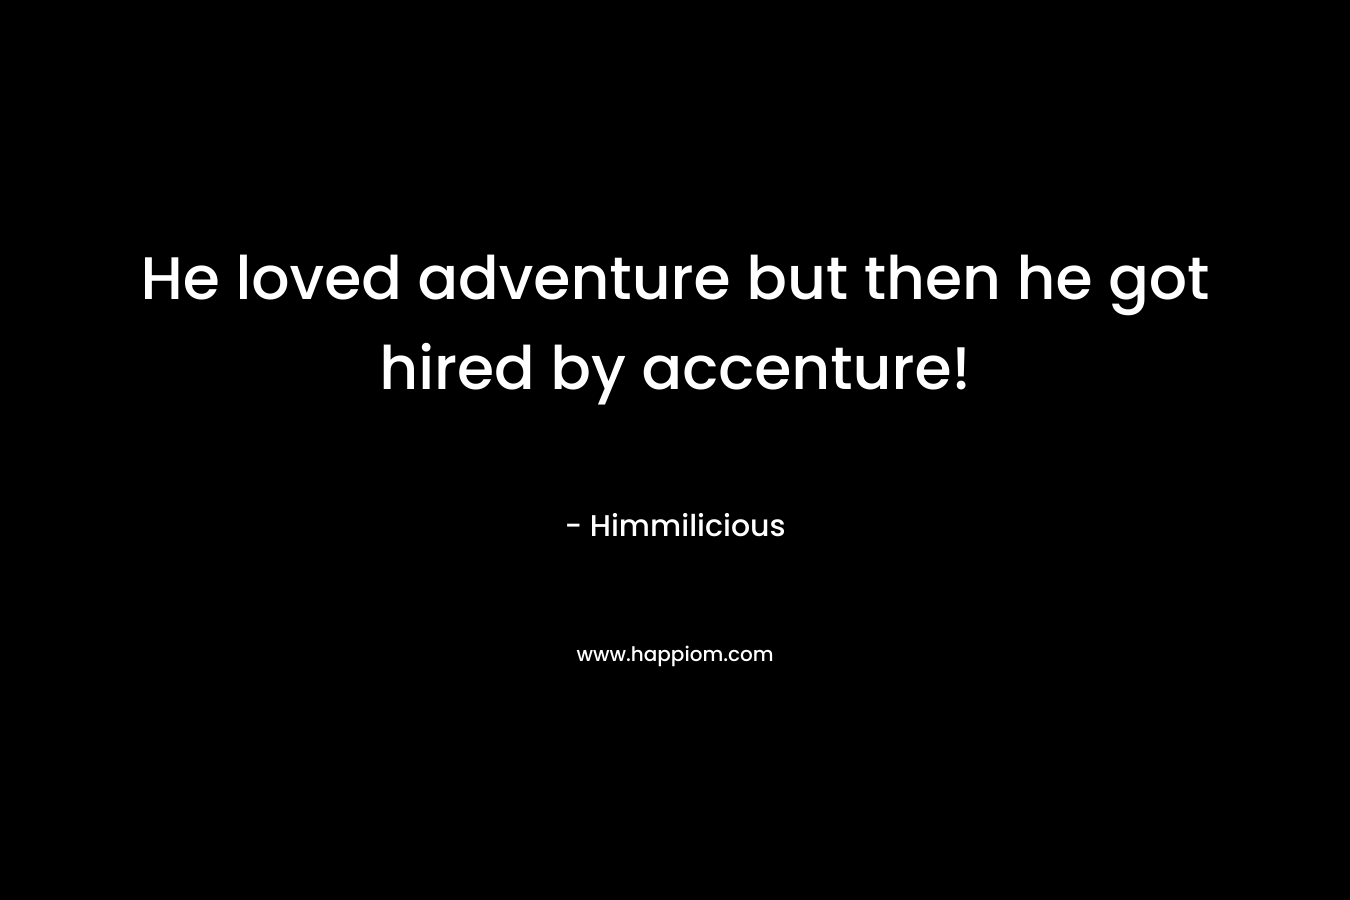 He loved adventure but then he got hired by accenture! – Himmilicious